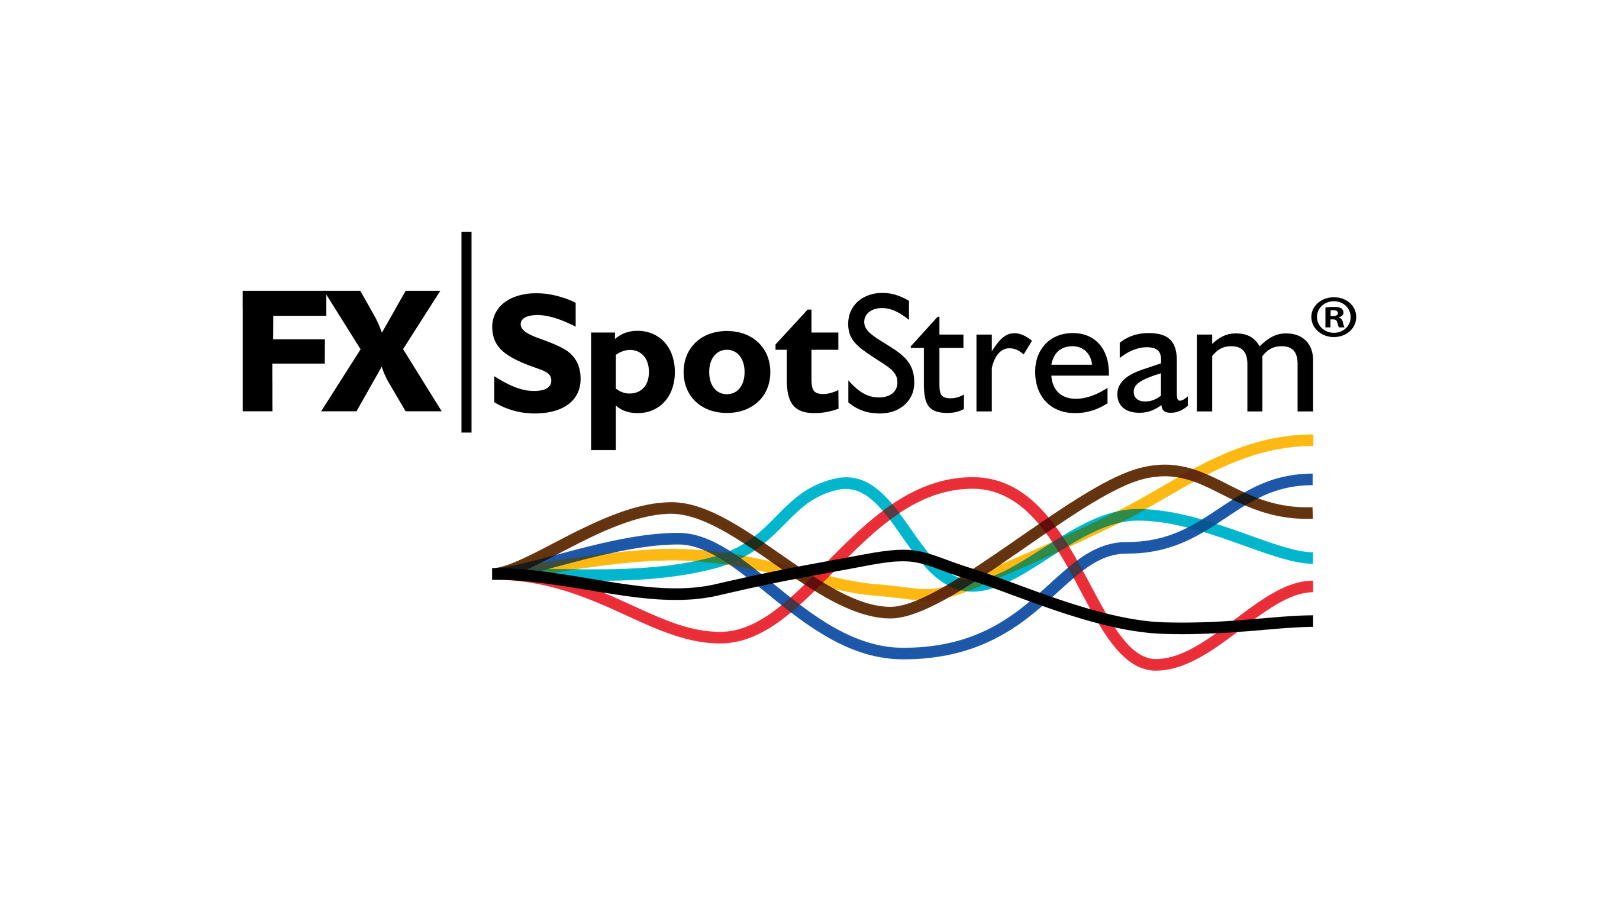 FXSpotStream Posts April ADV Down 12.64% On March ($61.25 billion), 25.76% Up On April 2021